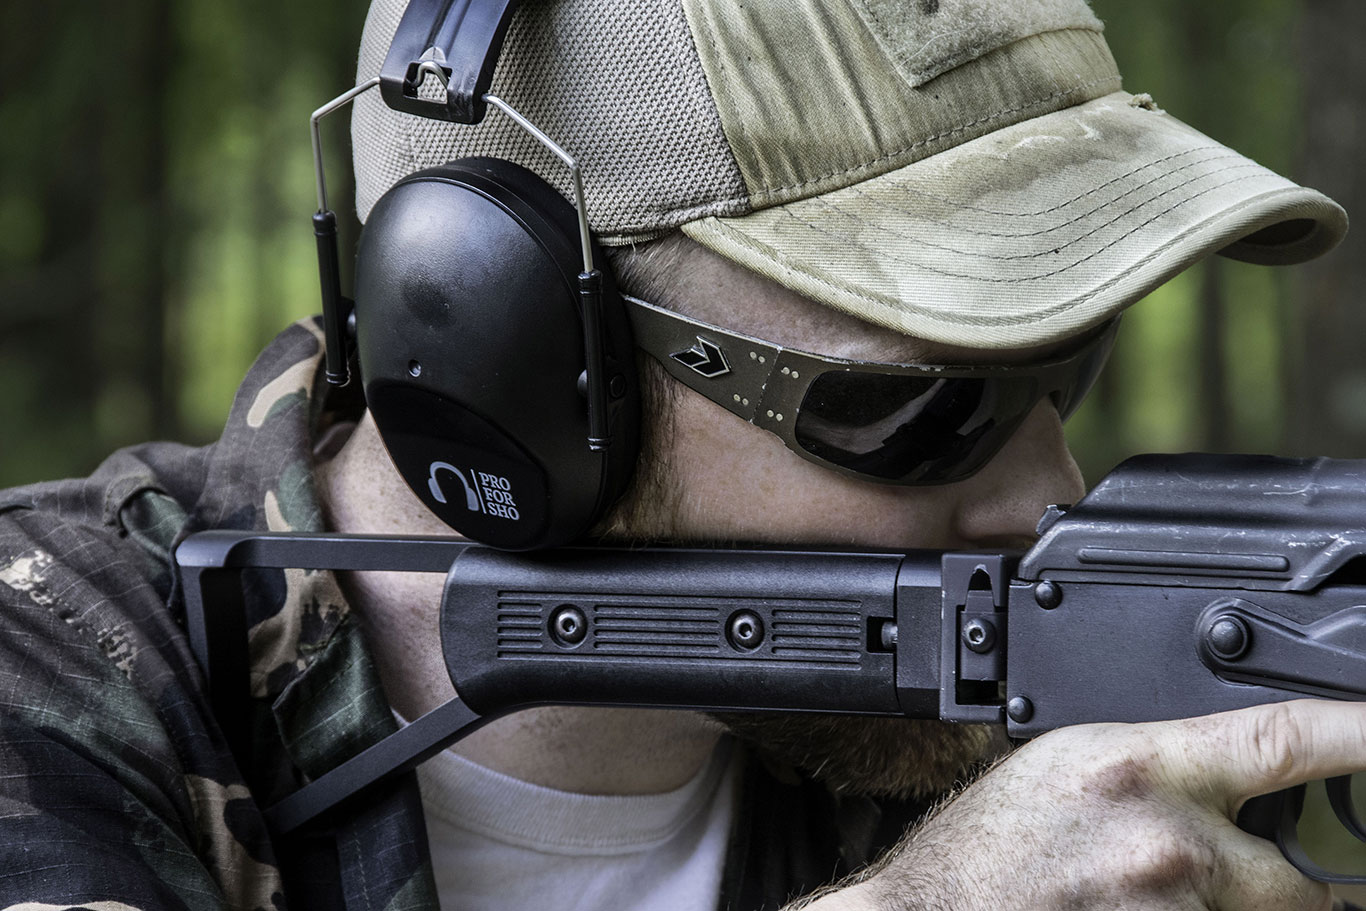 The muffs are low enough profile to allow the Author to get a proper sight picture with his compact Draco AKM SBR’d carbine.